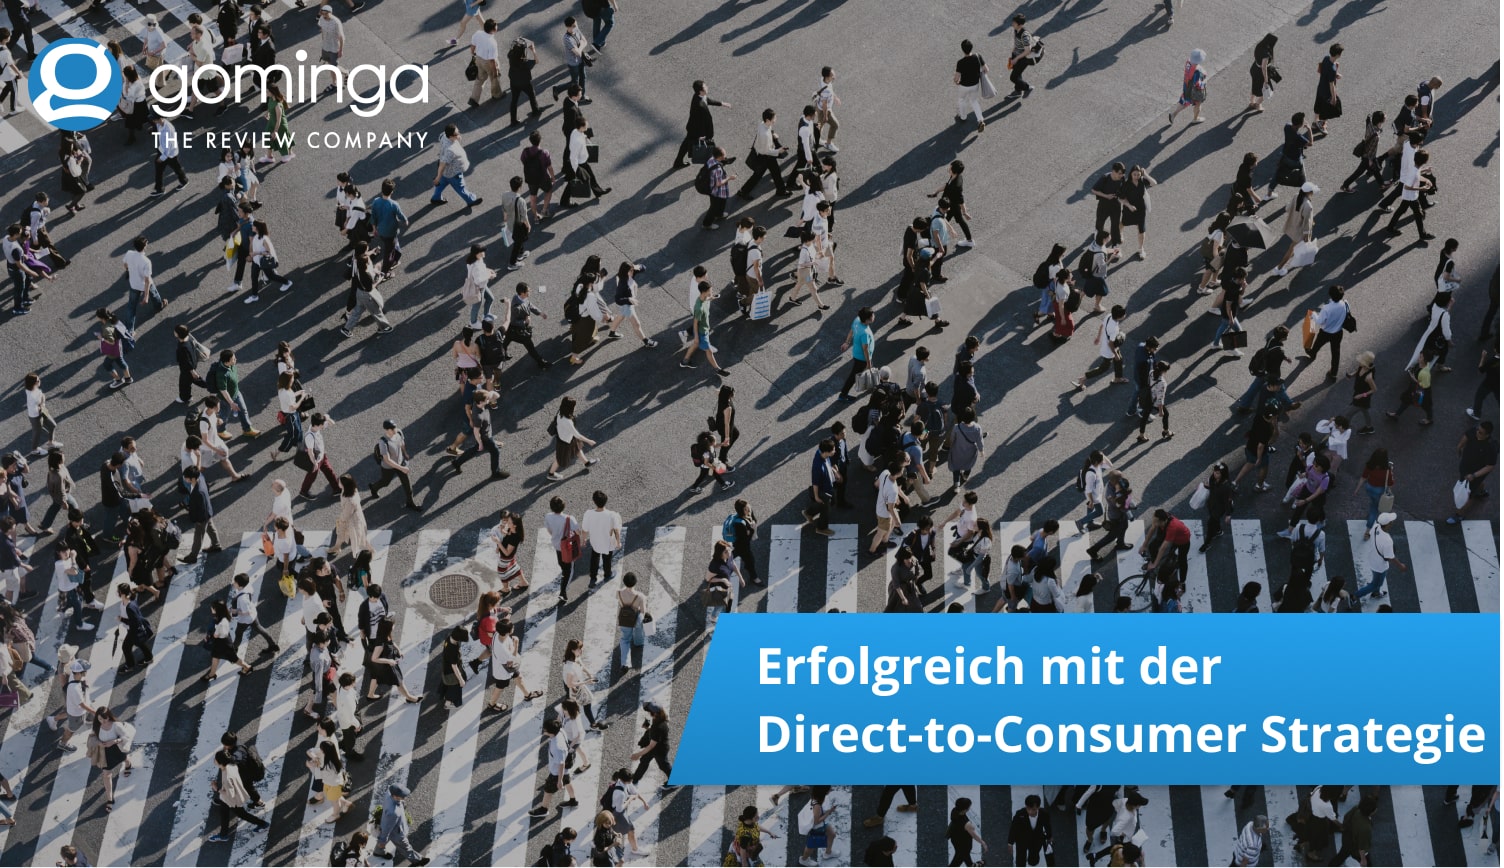 direct-to-consumer strategie